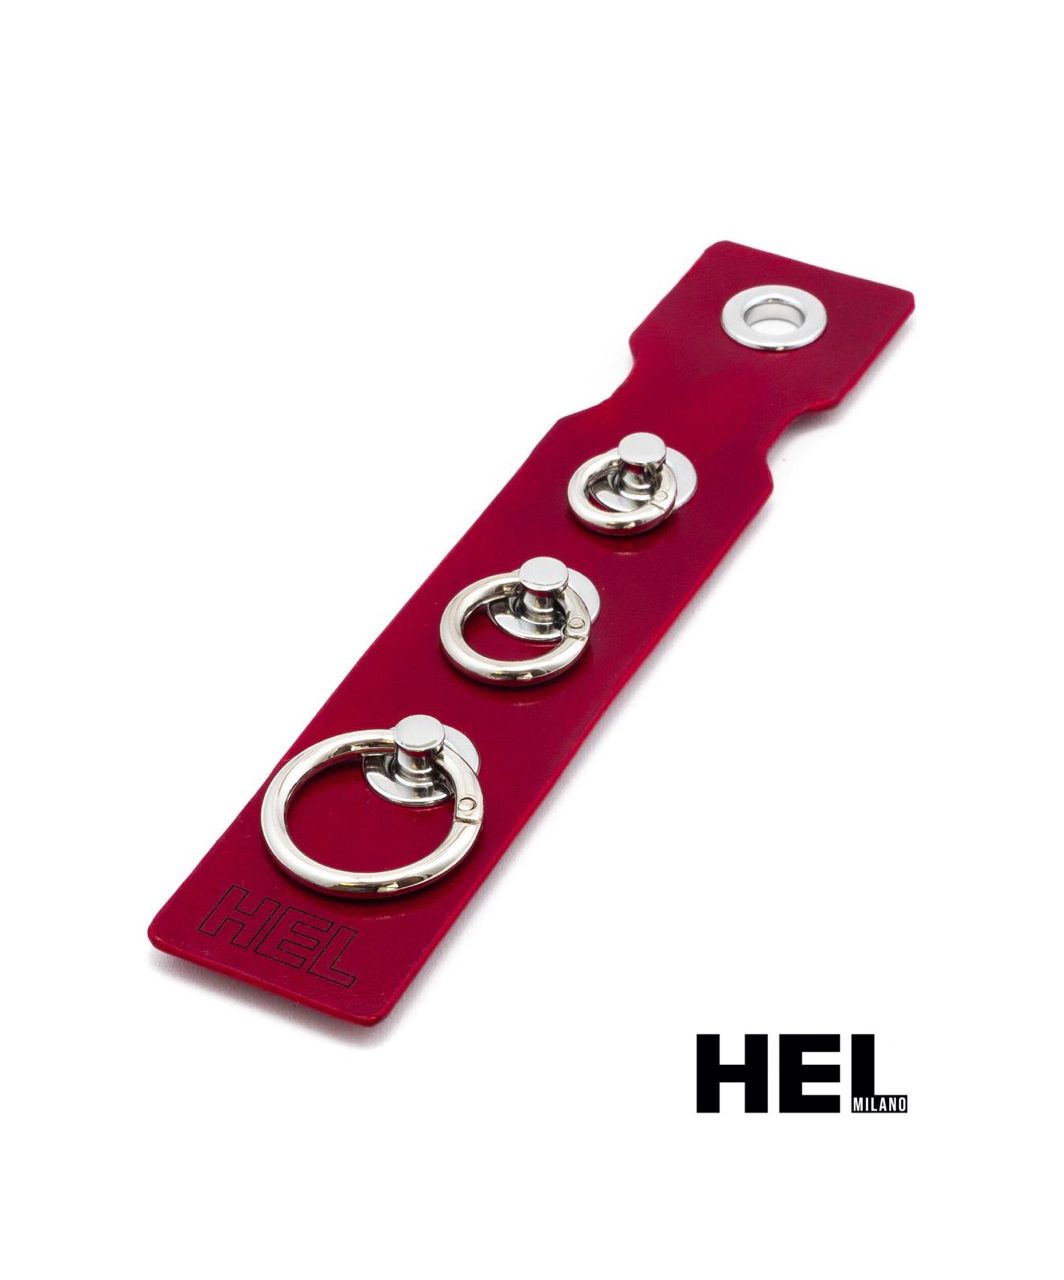 HEL Milano leather ring display